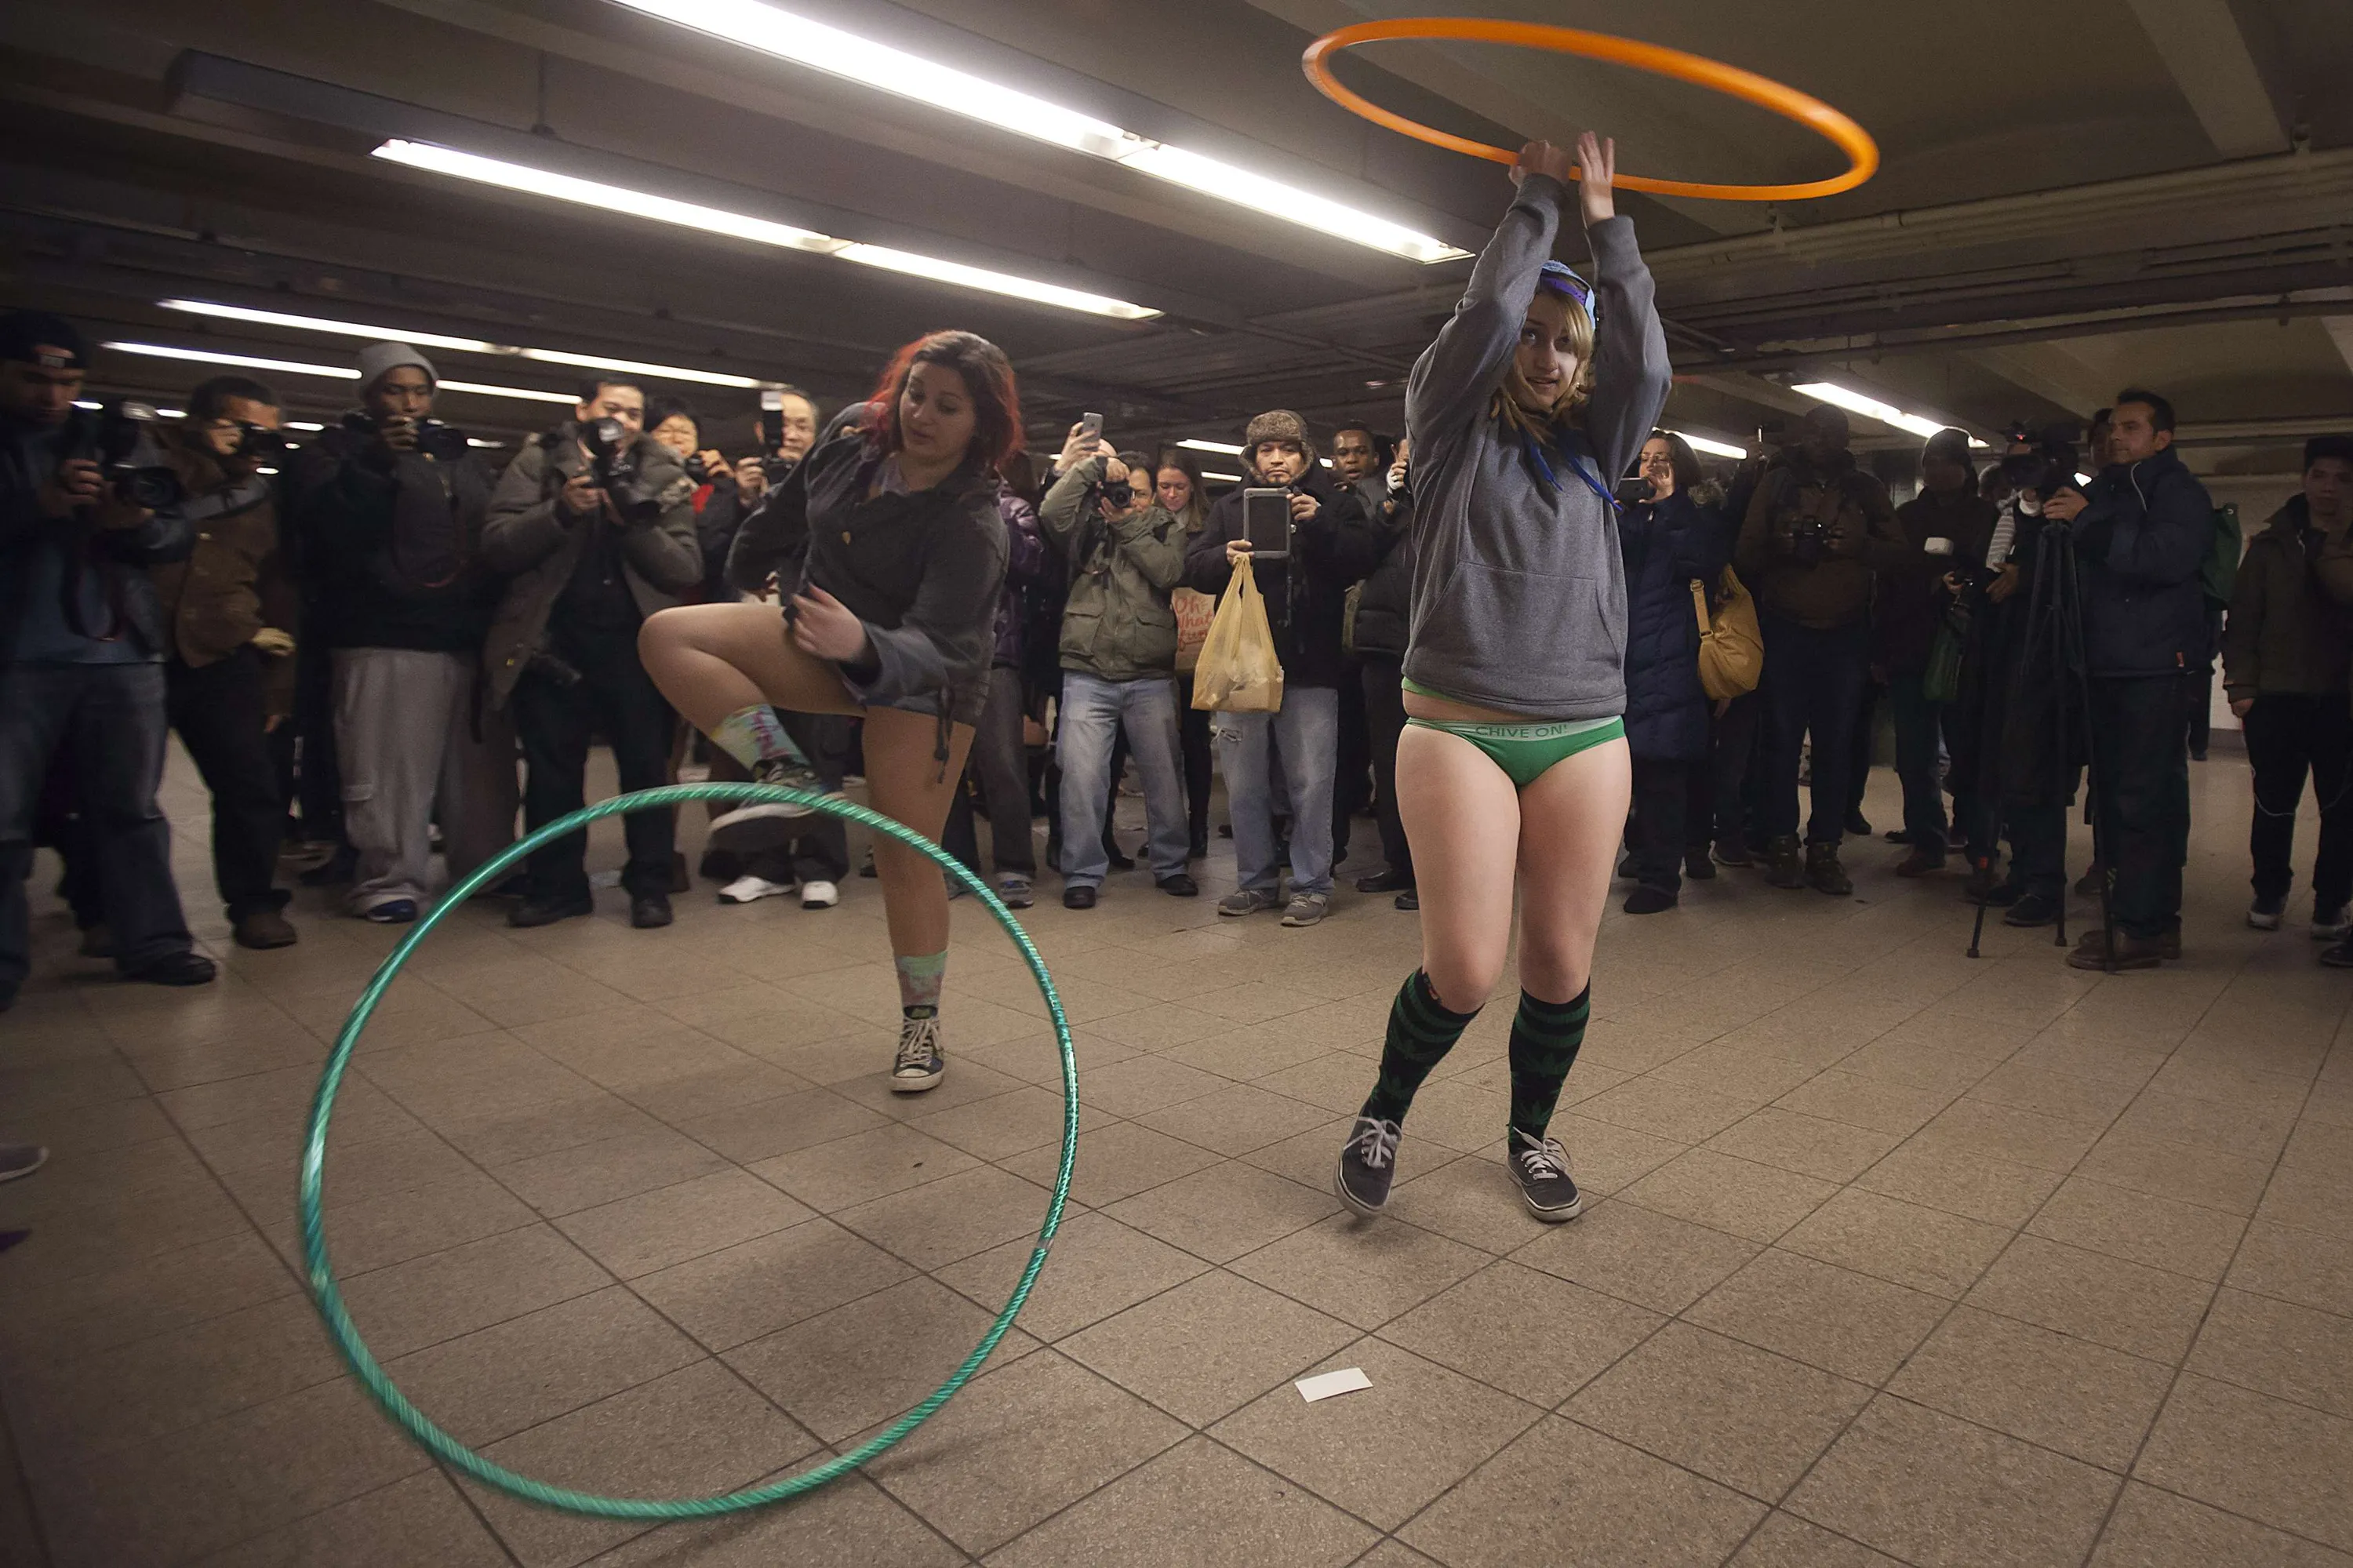 Next picture →. People, taking part in the "No Pants Subway Ride"...